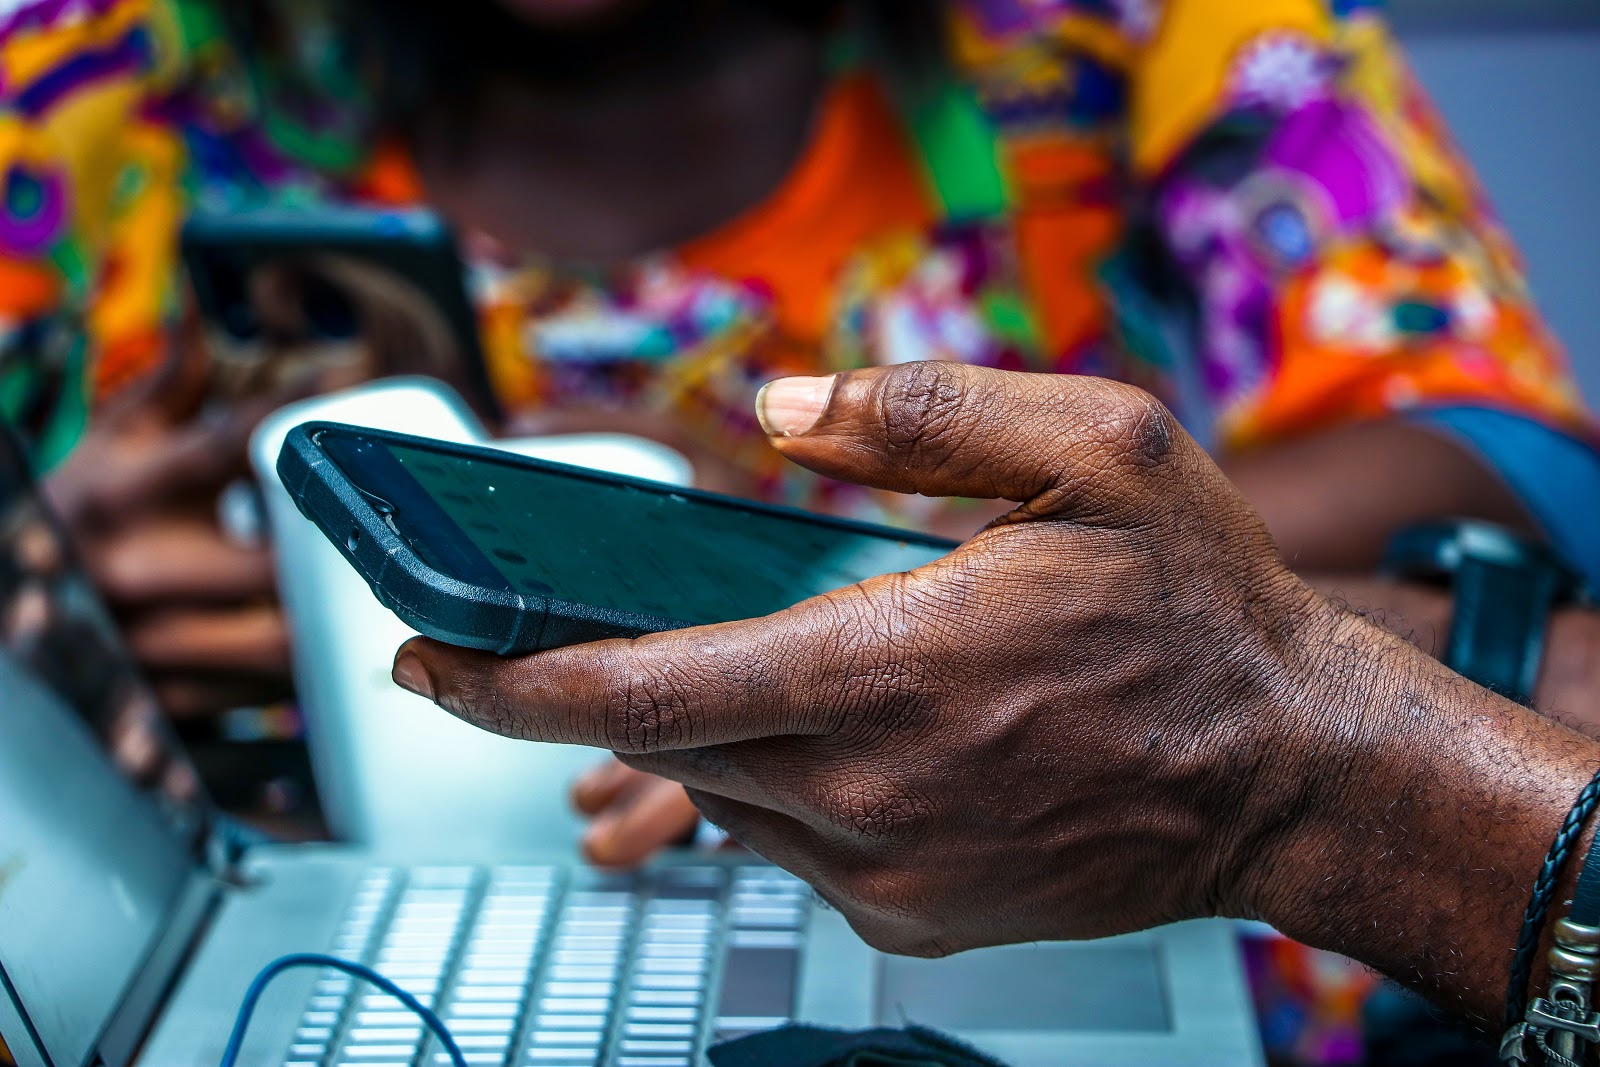 Nigeria a 60: 7  Nigerians Share Their Favourite Piece Of Technology And Reasons For Their Choice